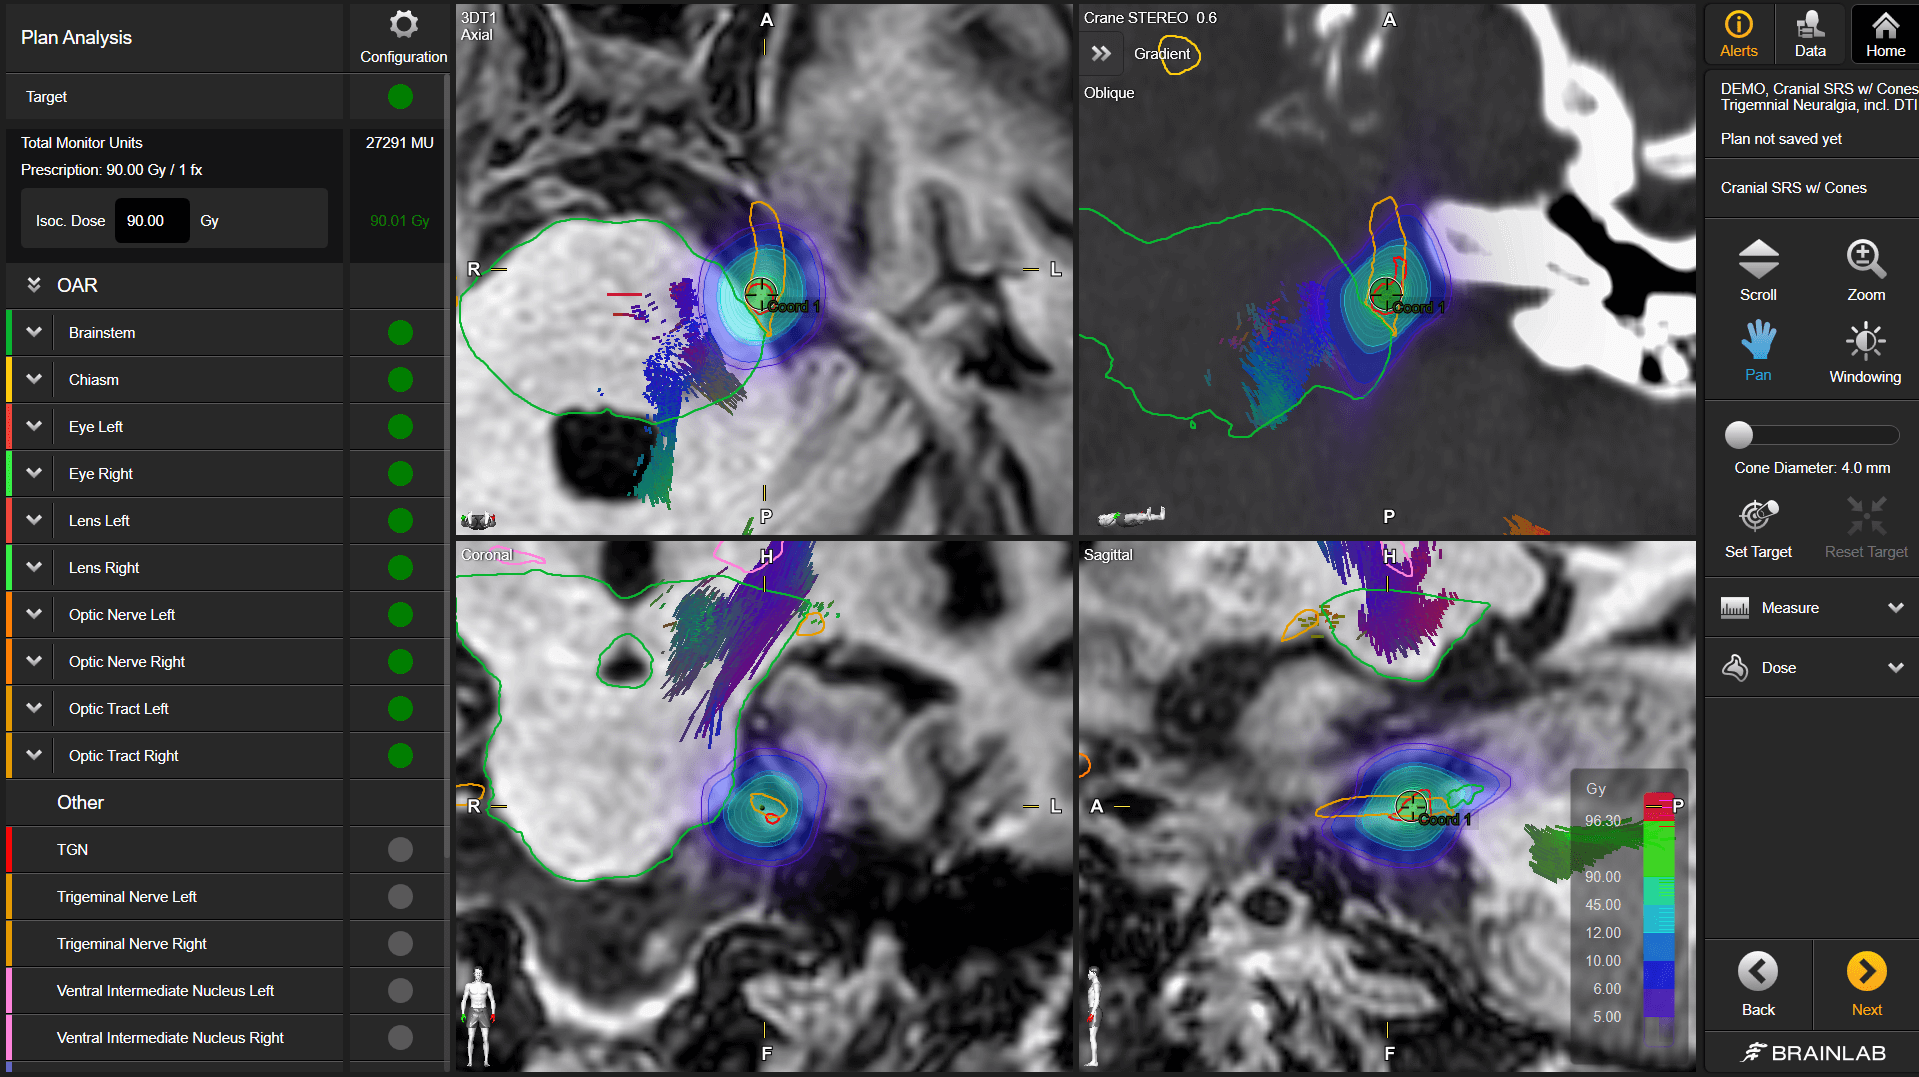 Software screen of Fibertracking software showing a brain scan in black and white and fiber tracts in color used to optimize radiotherapy treatment planning.